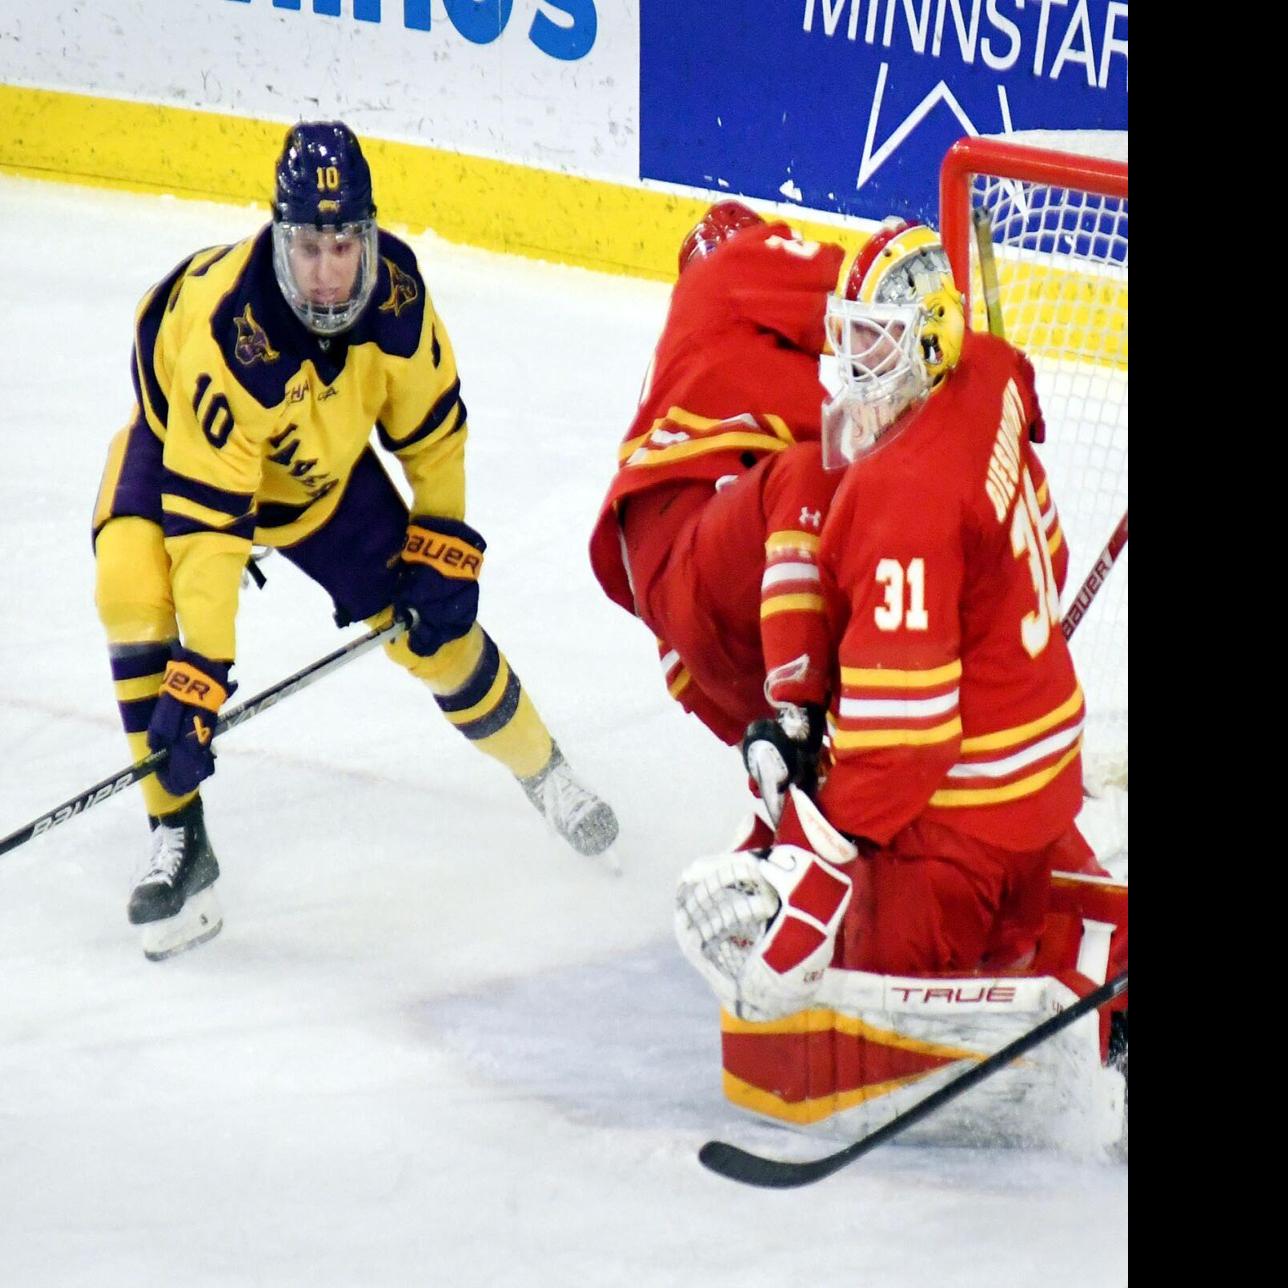 Aamodt Signs With Colorado Avalanche - Minnesota State University - Mankato  Athletics